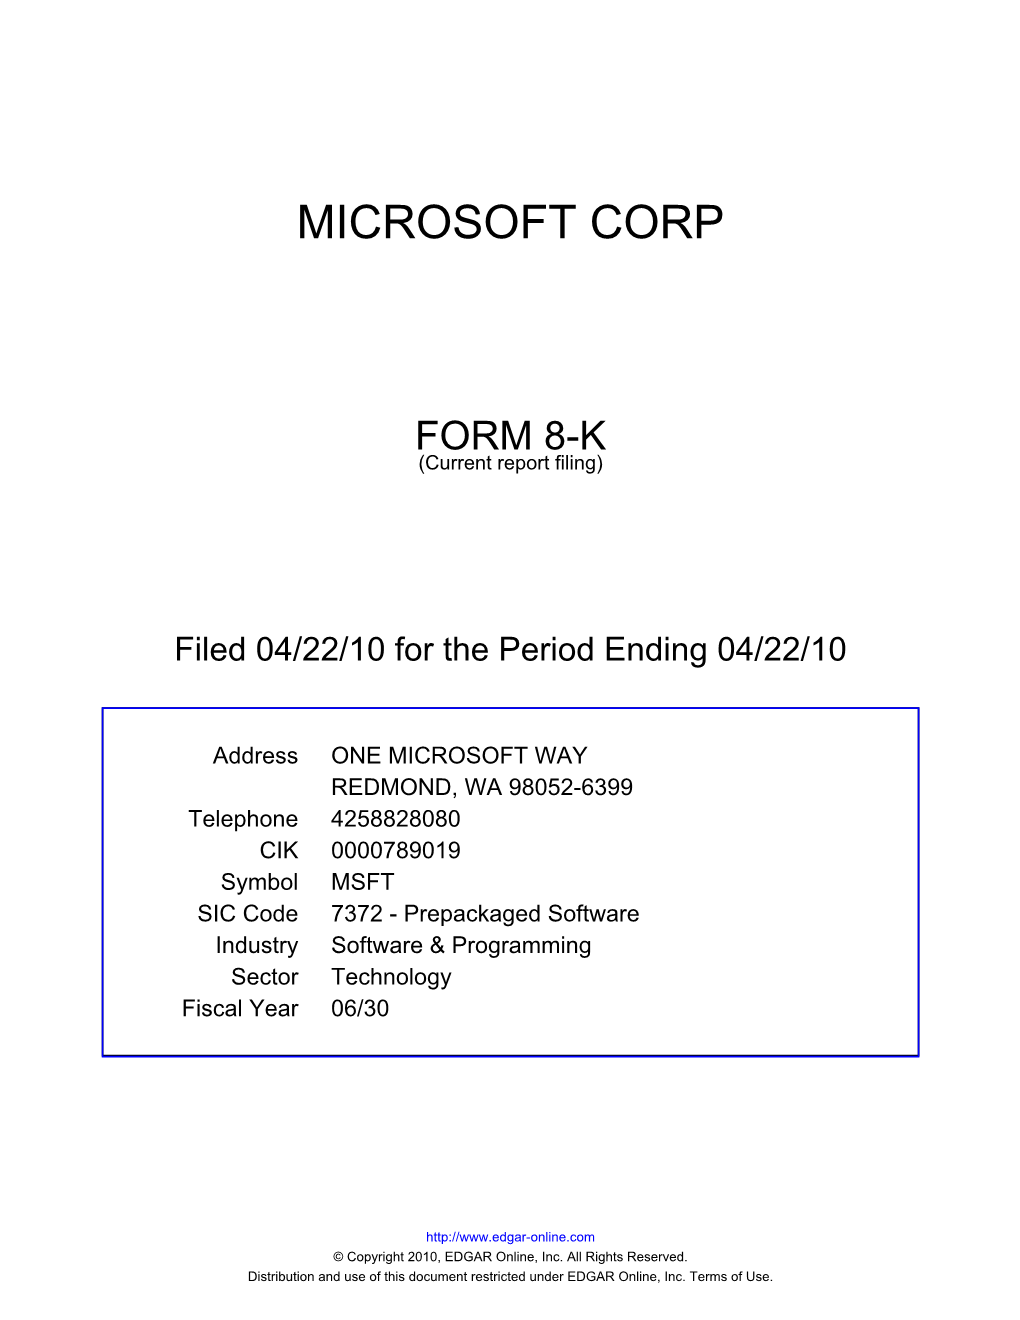 Microsoft Corporation (Exact Name of Registrant As Specified in Its Charter)